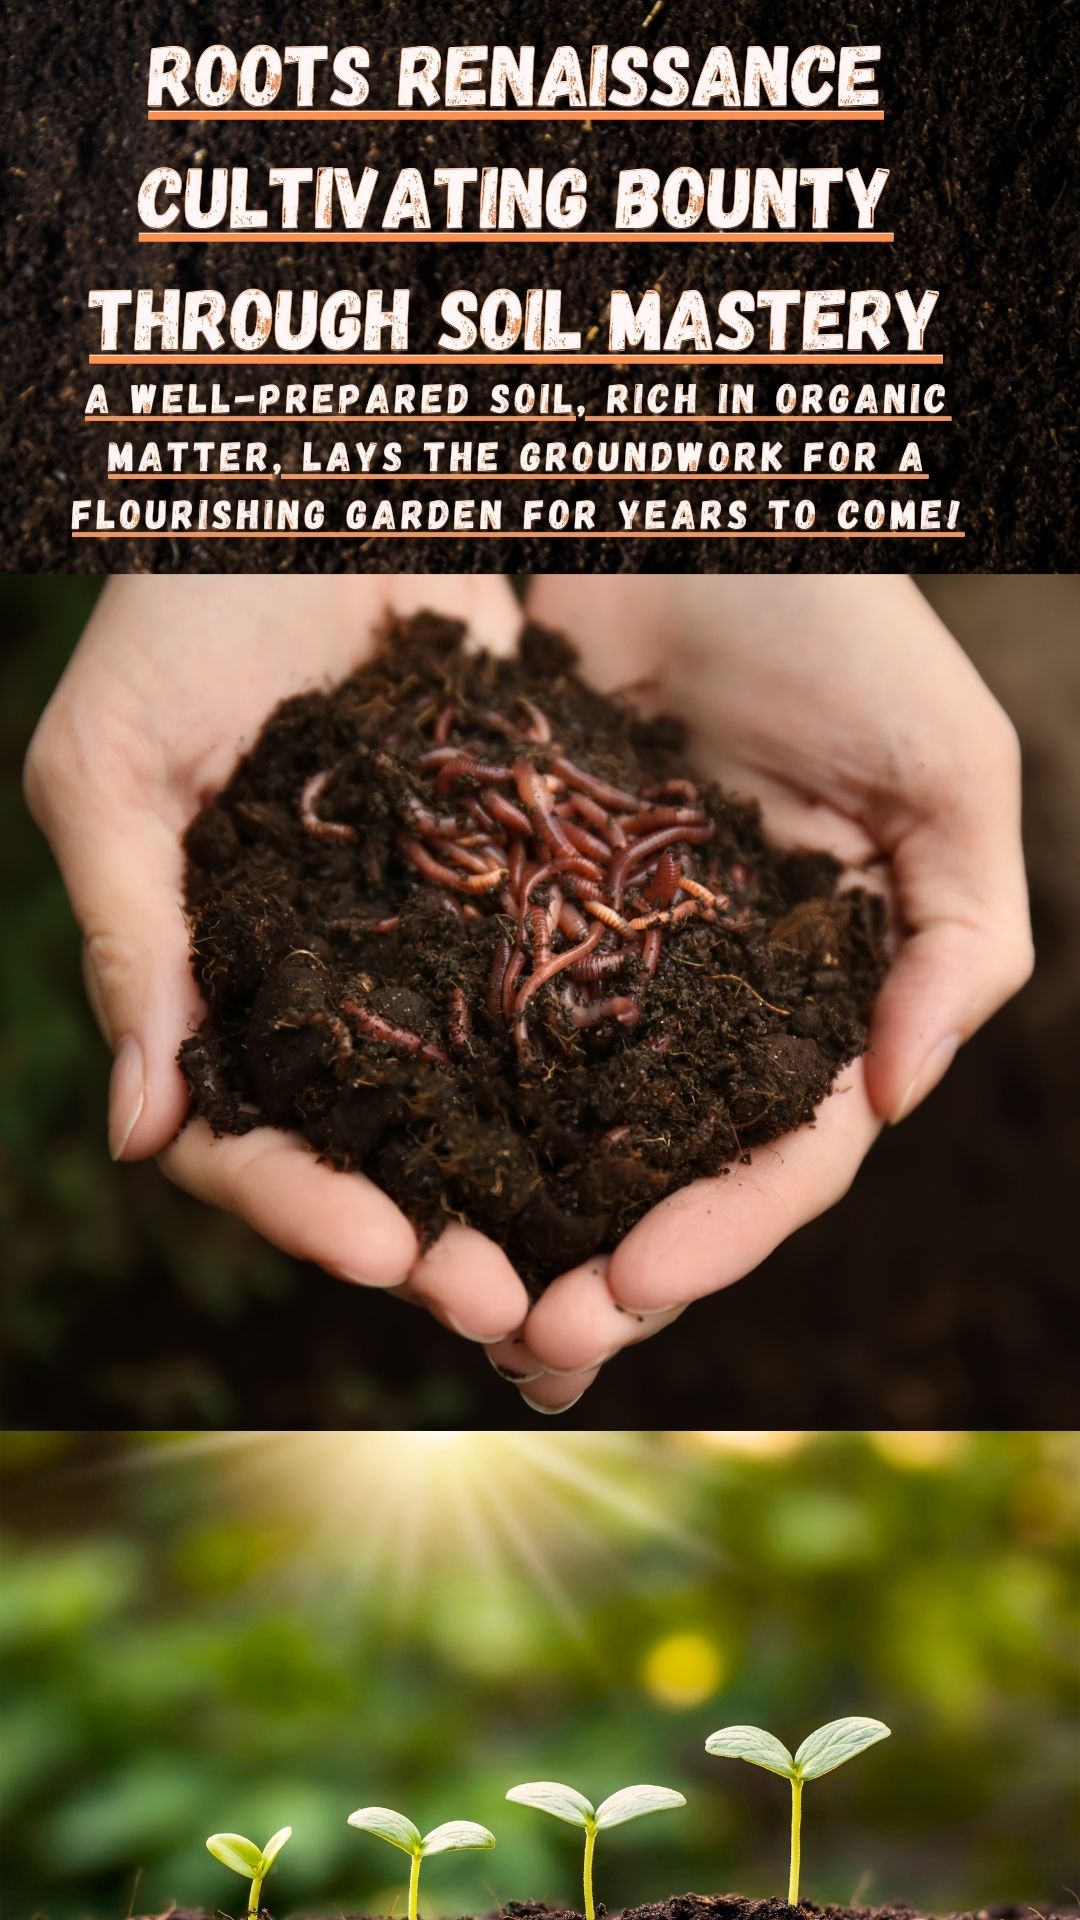 building up the soil is akin to orchestrating a symphony; it requires knowledge, finesse, and dedication. A well-prepared soil, rich in organic matter, lays the groundwork for a flourishing garden for years to come!